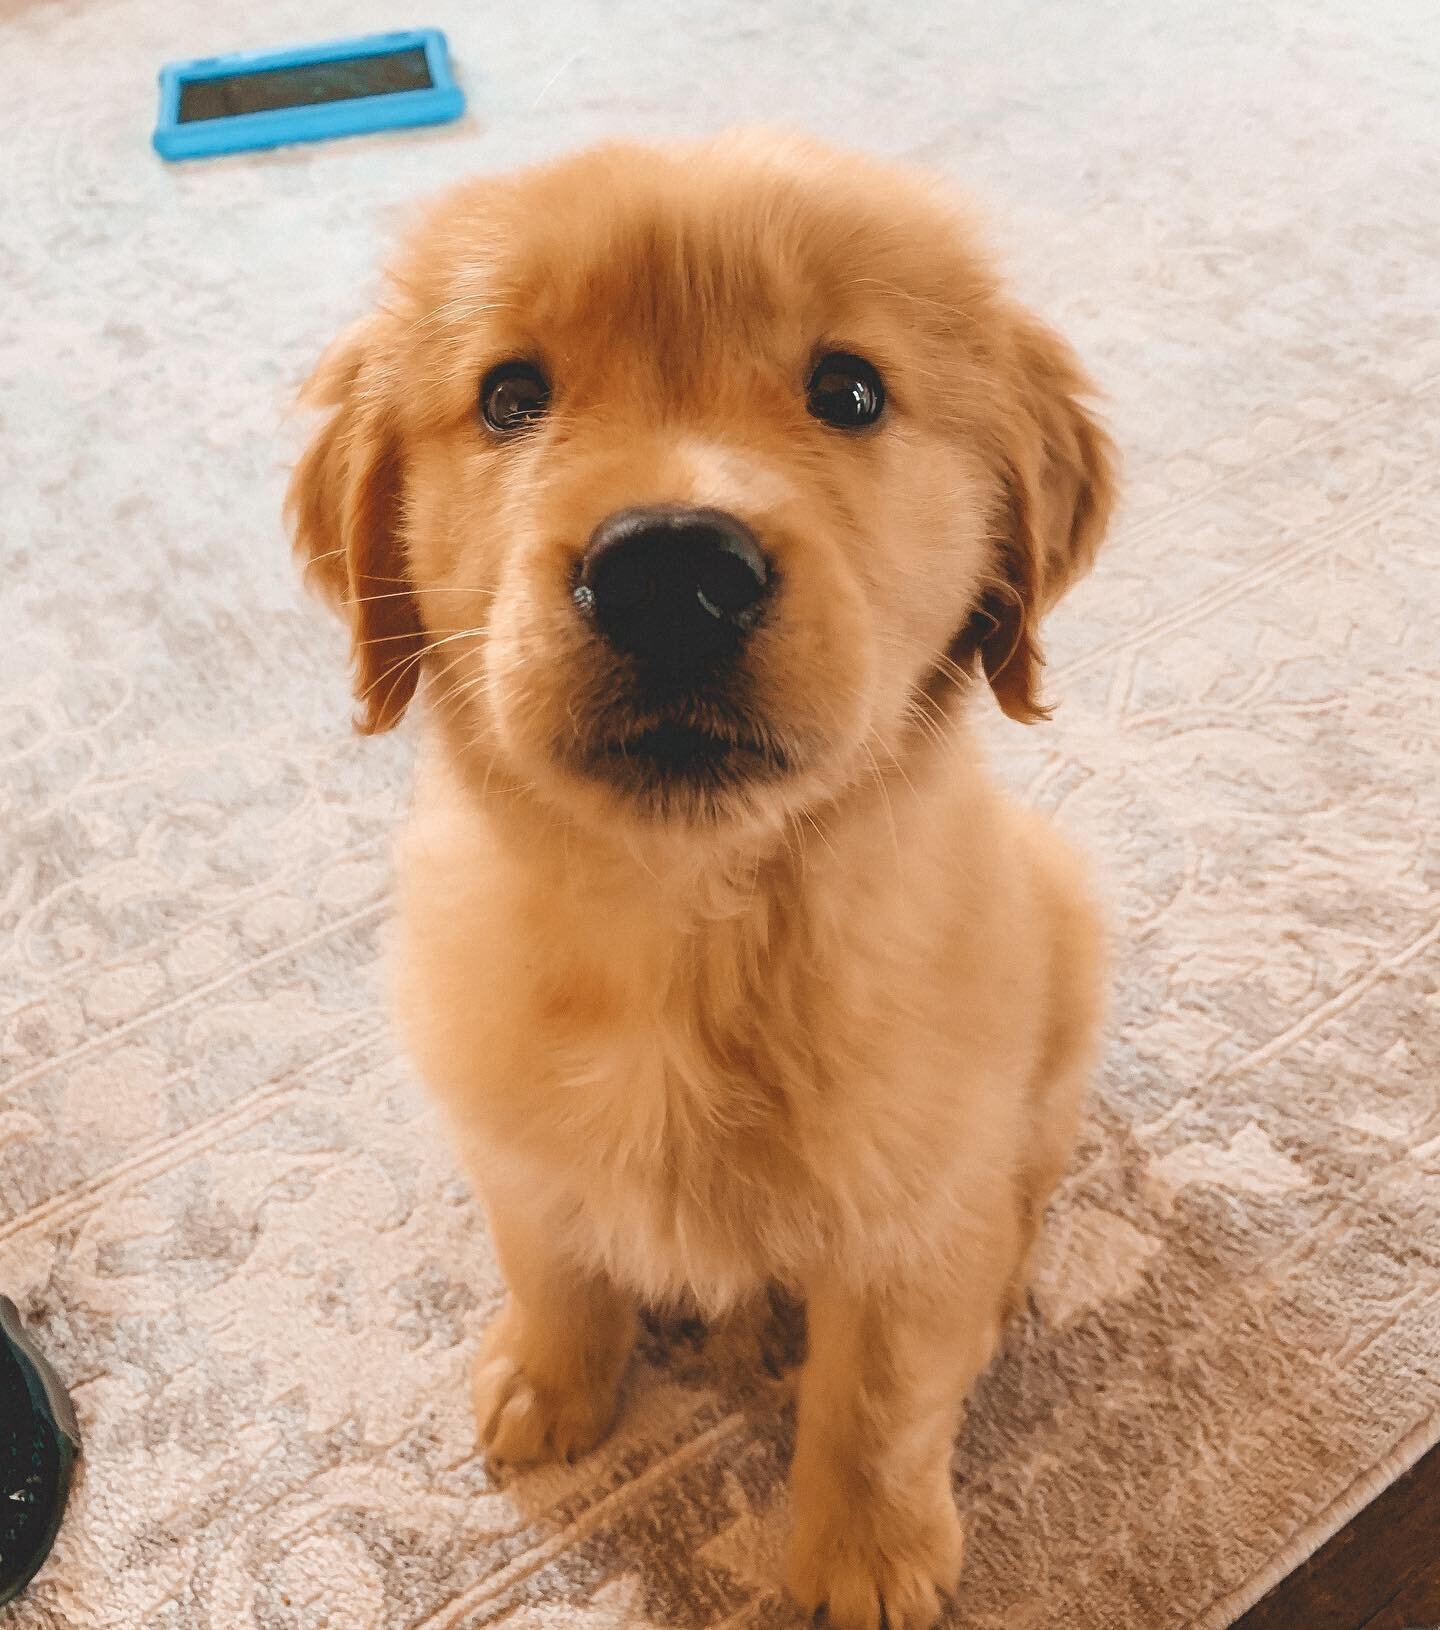 Happy Friday; may it be golden!✨

Excited to welcome Angus, &ldquo;Gus&rdquo;, to @ninetofivecanine puppy lessons! While already a good boy, training will help him stay that way!

#ninetofivecanine #puppytraining #capecoddogtrainer #newpuppy #bostond